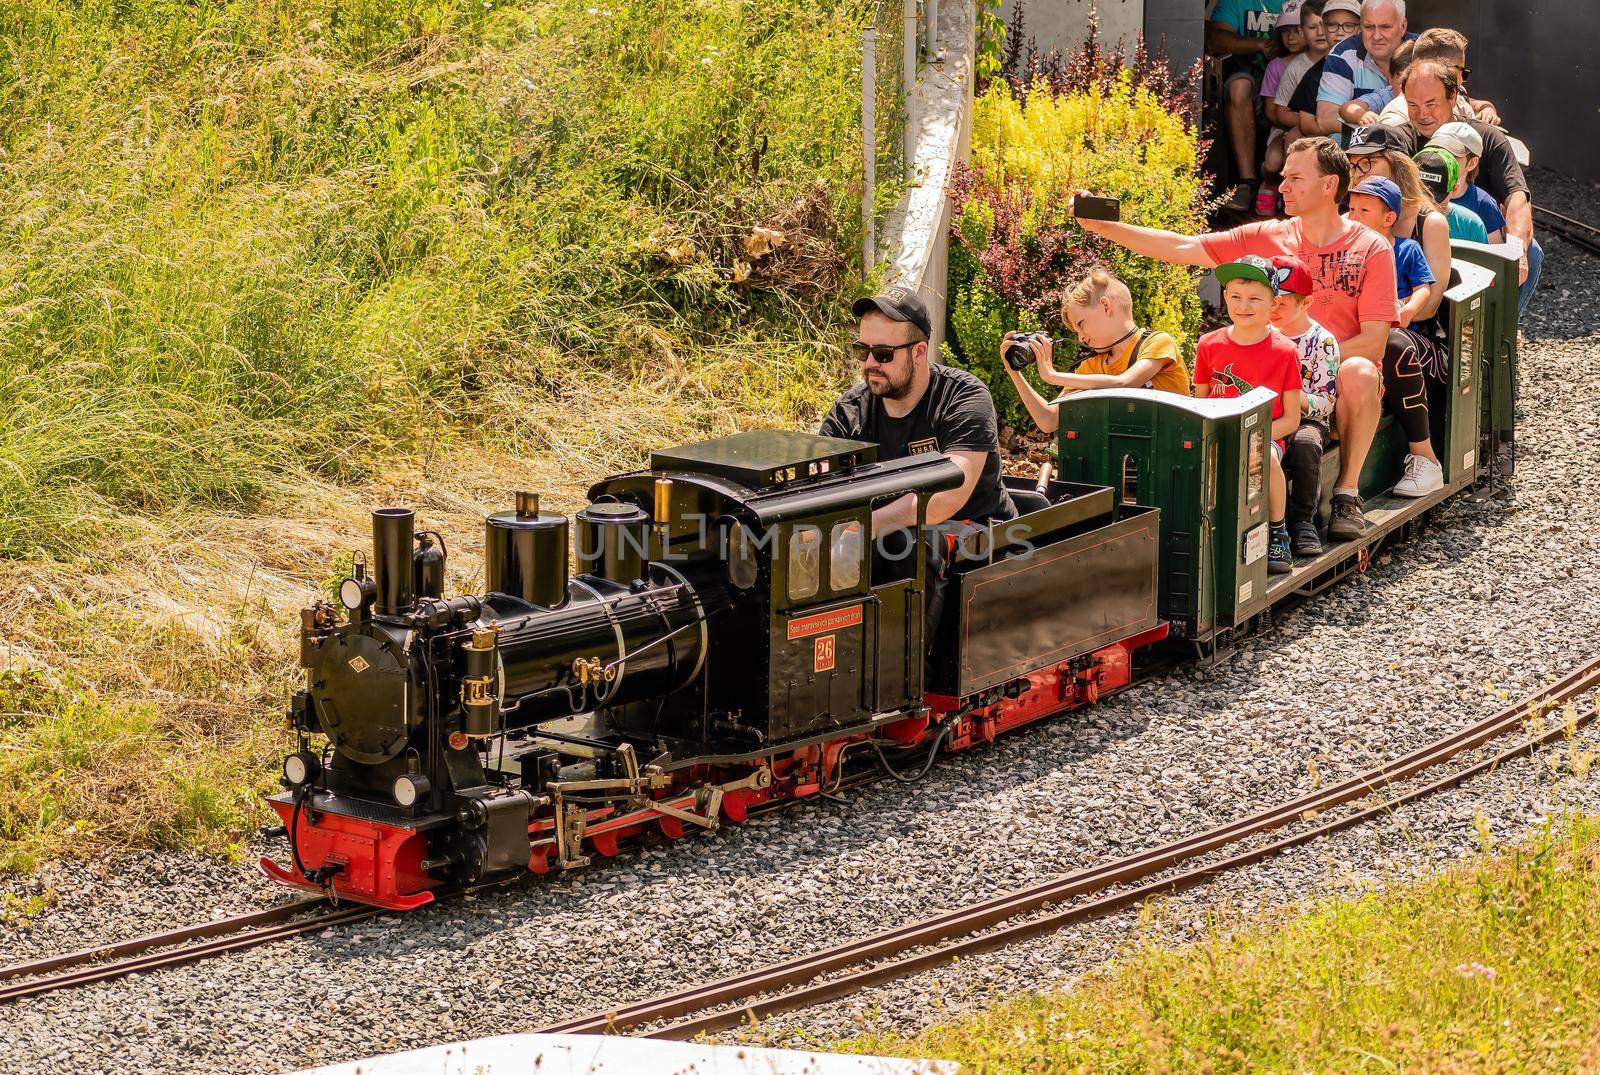 A set of steam locomotive model with many tourists by rostik924